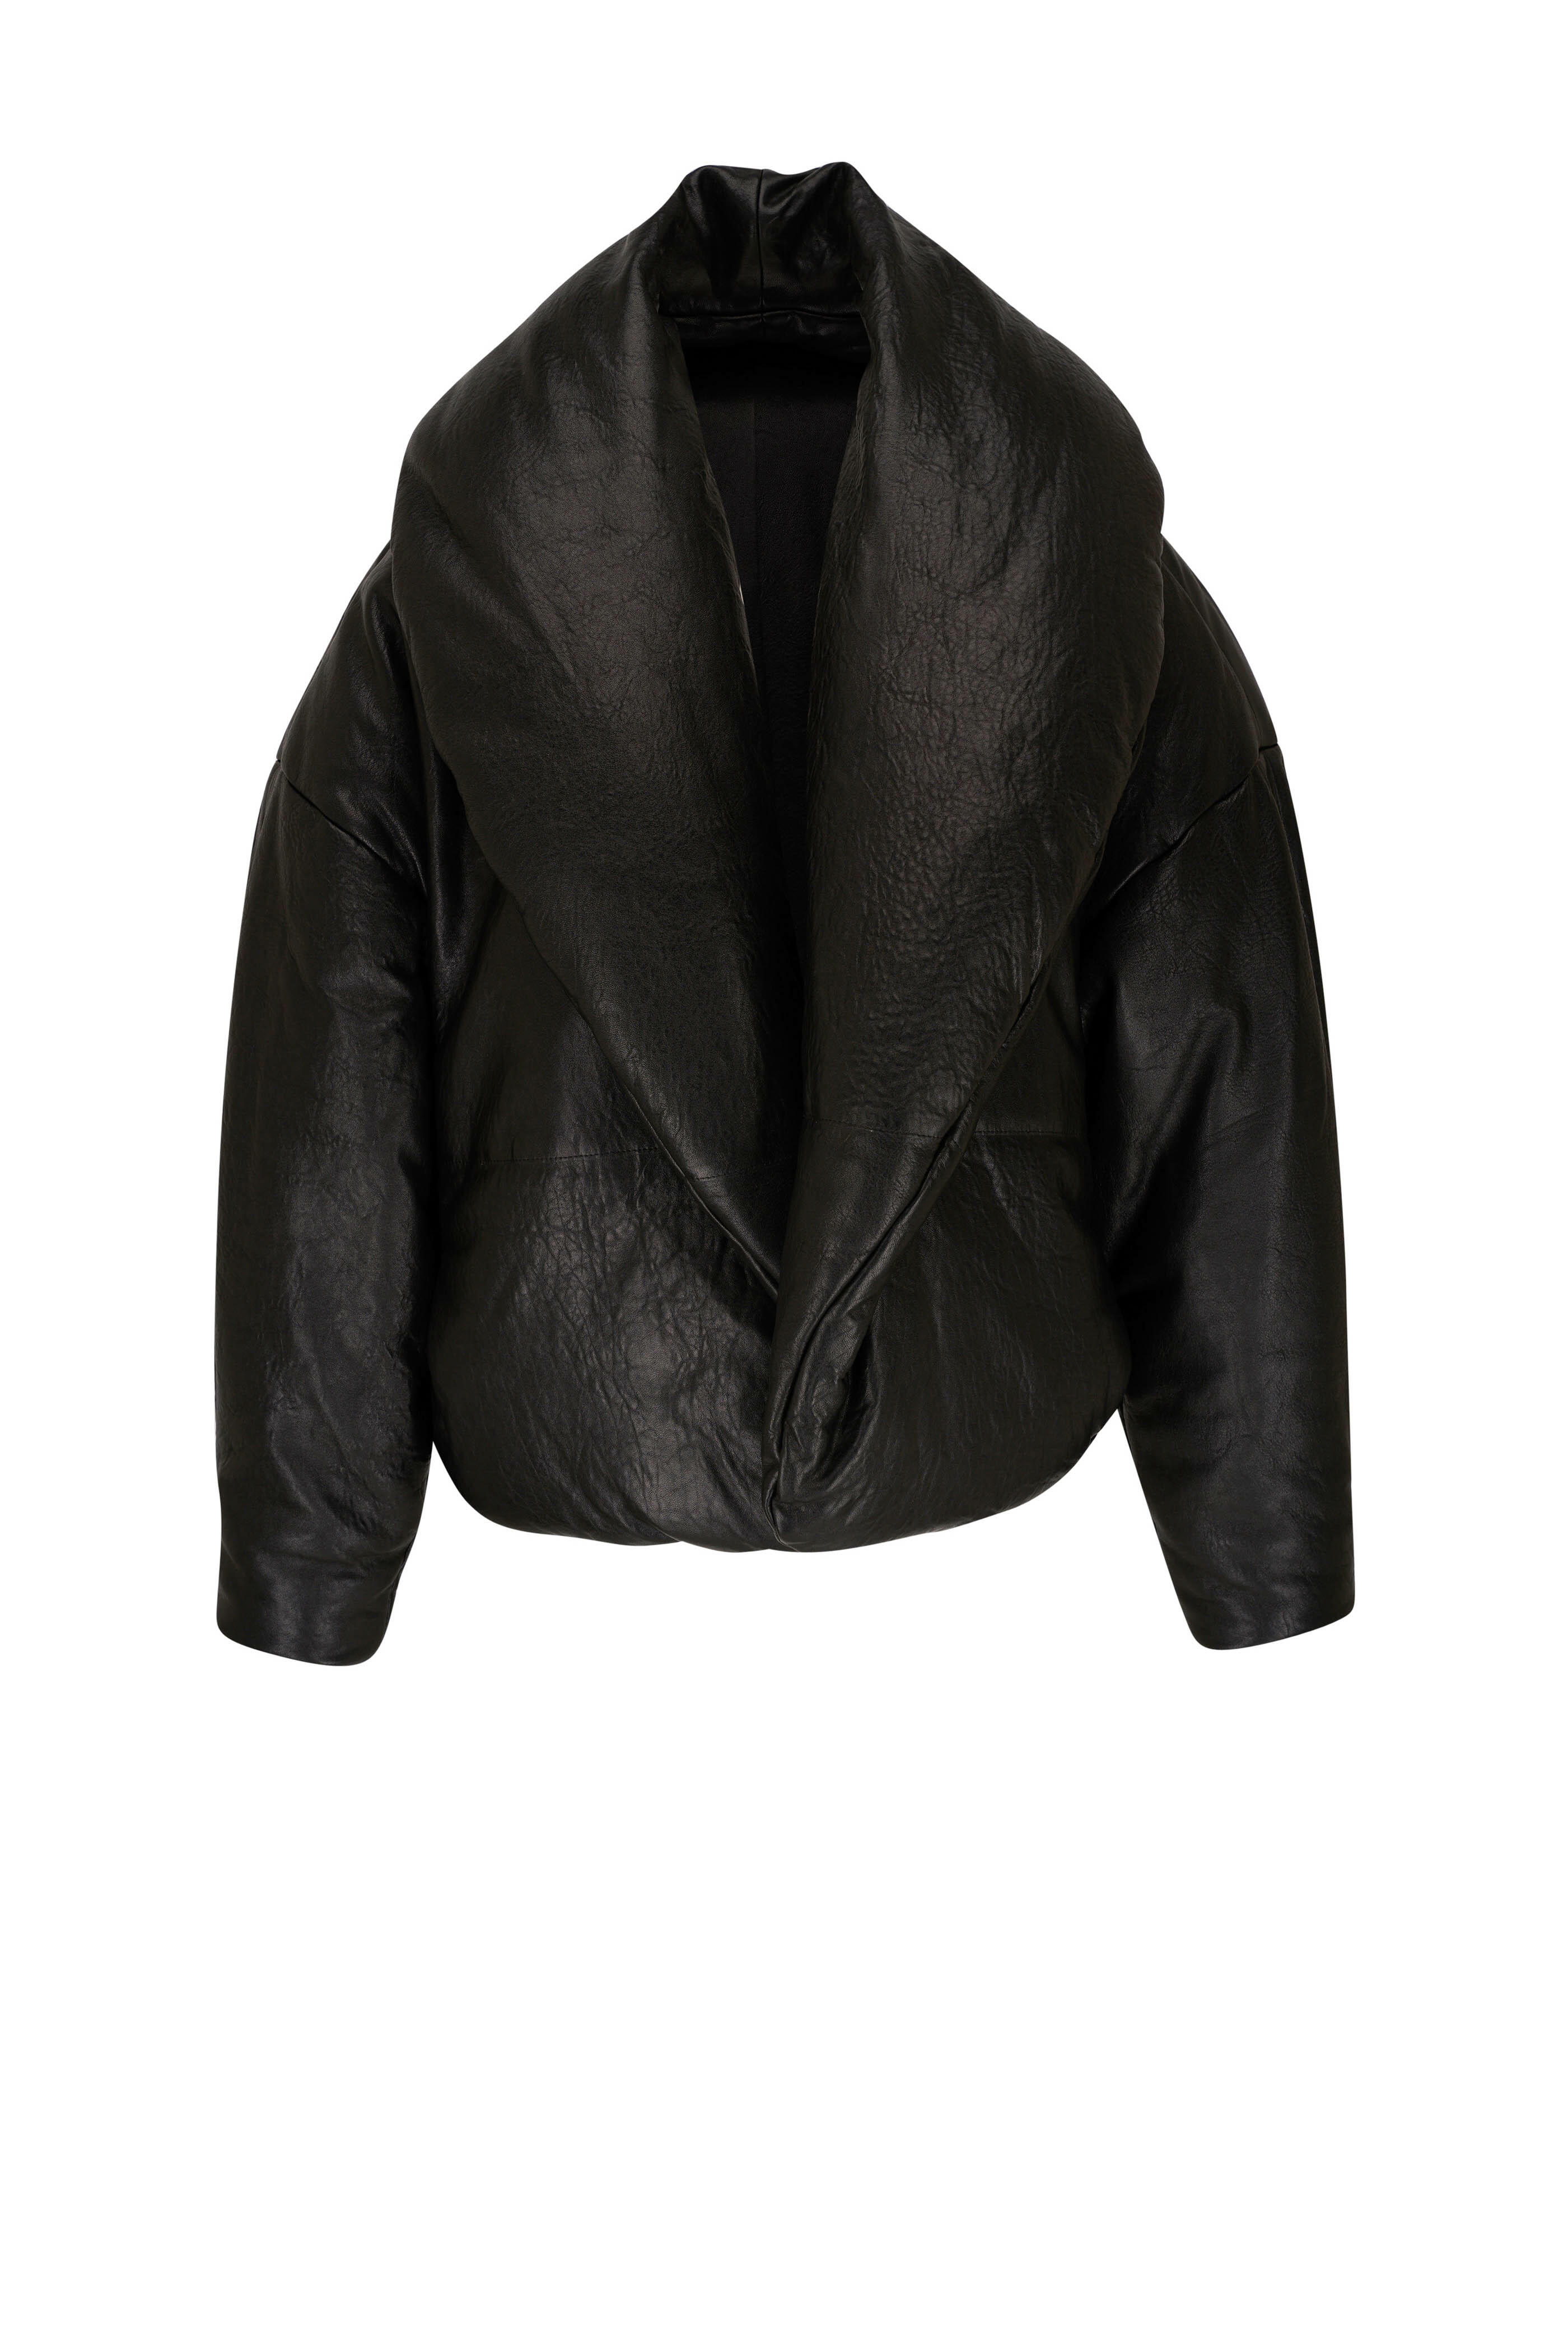 Saint Laurent Quilted Leather Hooded Down Jacket - Men - Black Coats and Jackets - L